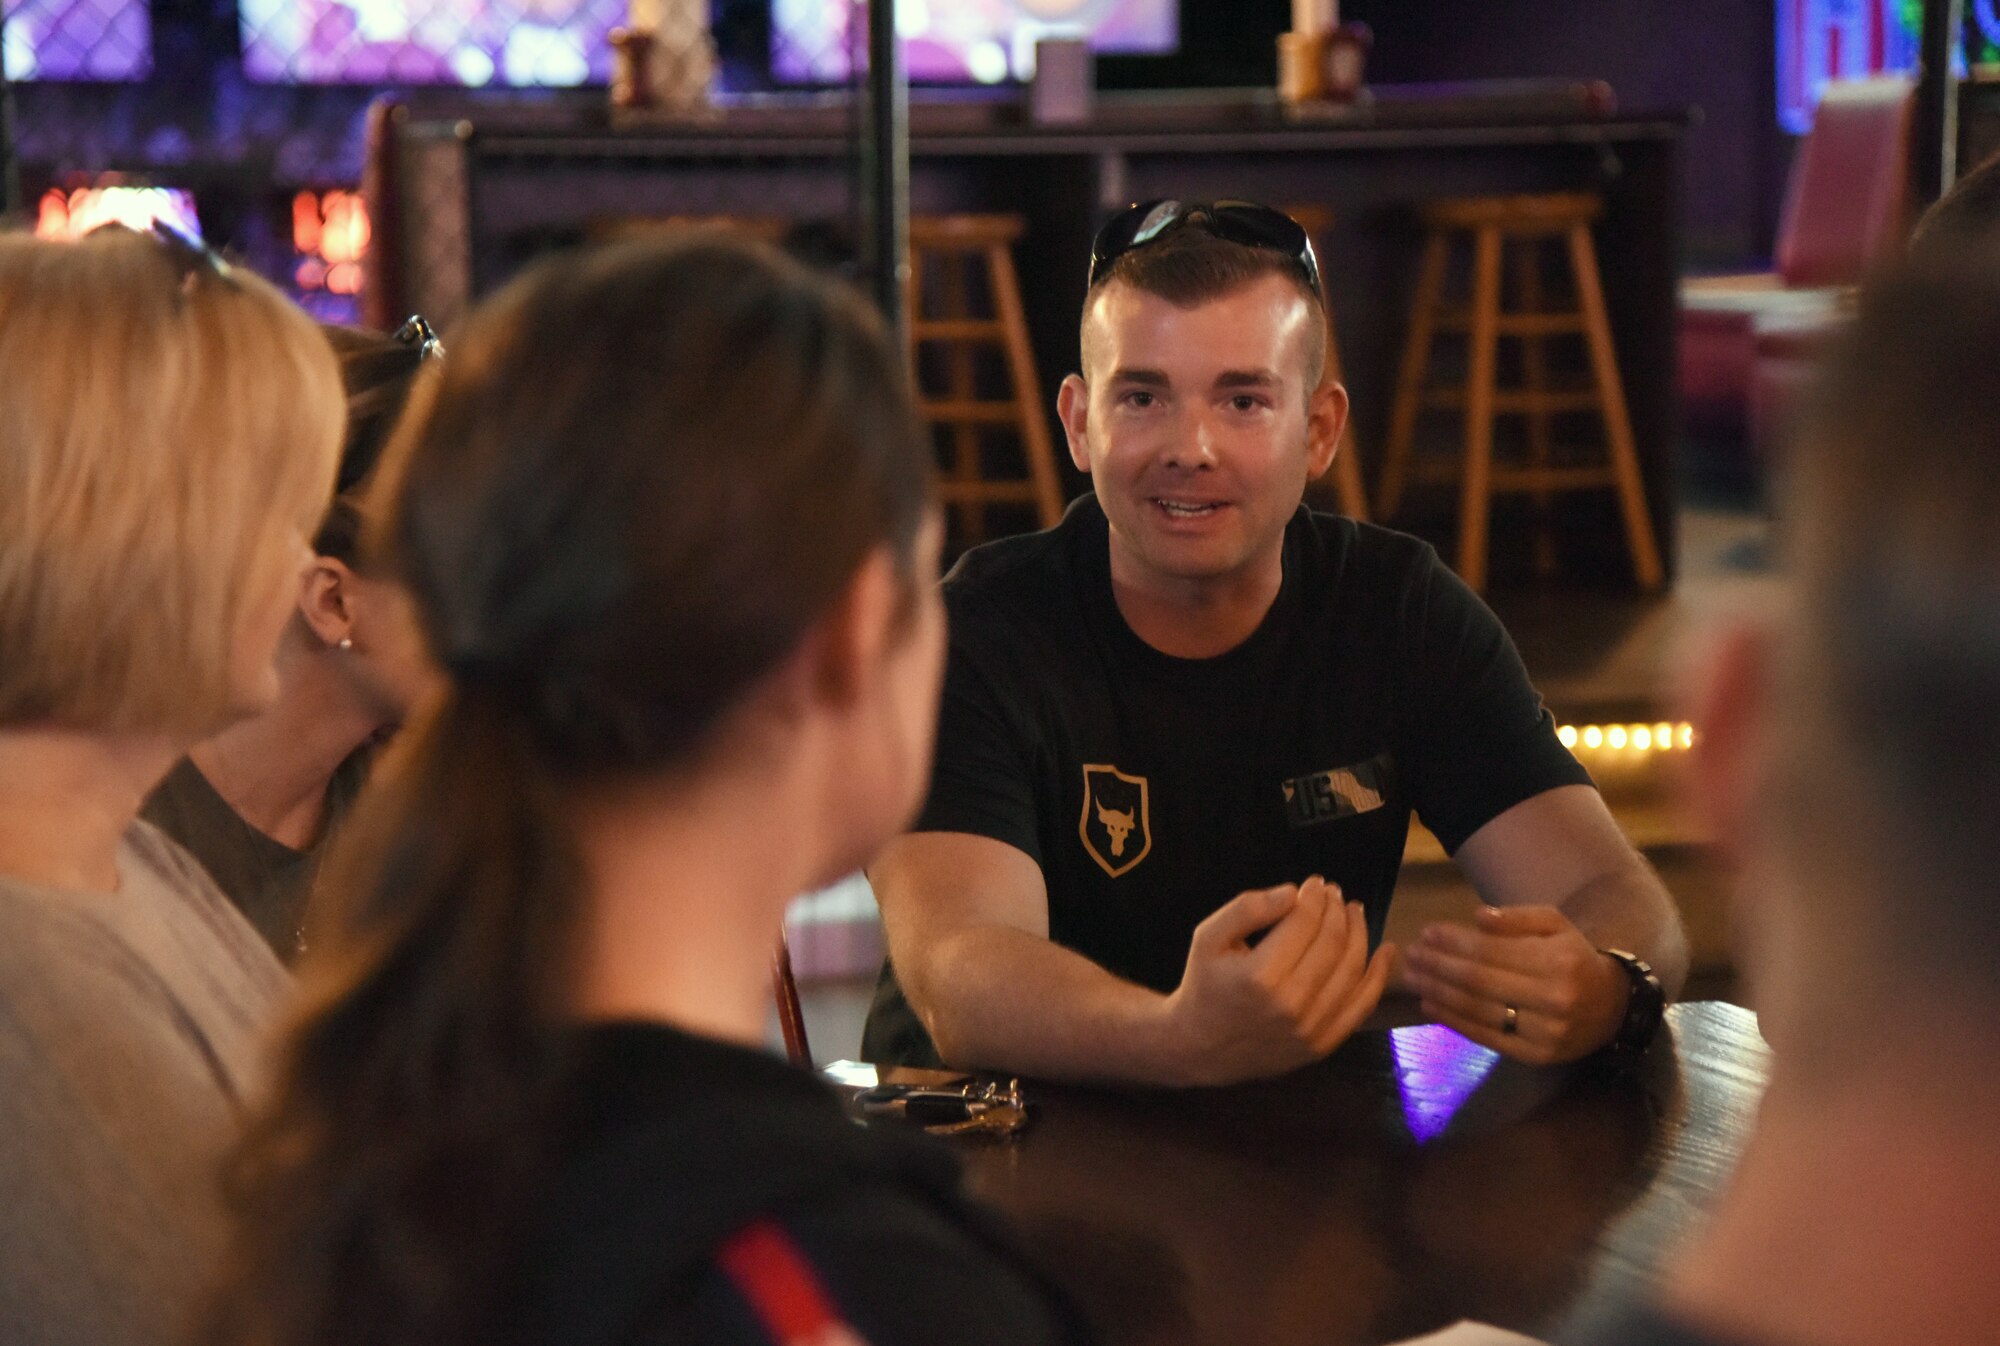 Second Lt. Joshua Field, 333rd Training Squadron student, and the 81st Training Wing commander’s support staff have a discussion during Dragon Chat at Big Play in Biloxi, Mississippi, April 19, 2018. Dragon Chat consisted of Airmen participating in small group discussions within their units to focus on building resiliency and team building initiatives. (U.S. Air Force photo by Kemberly Groue)